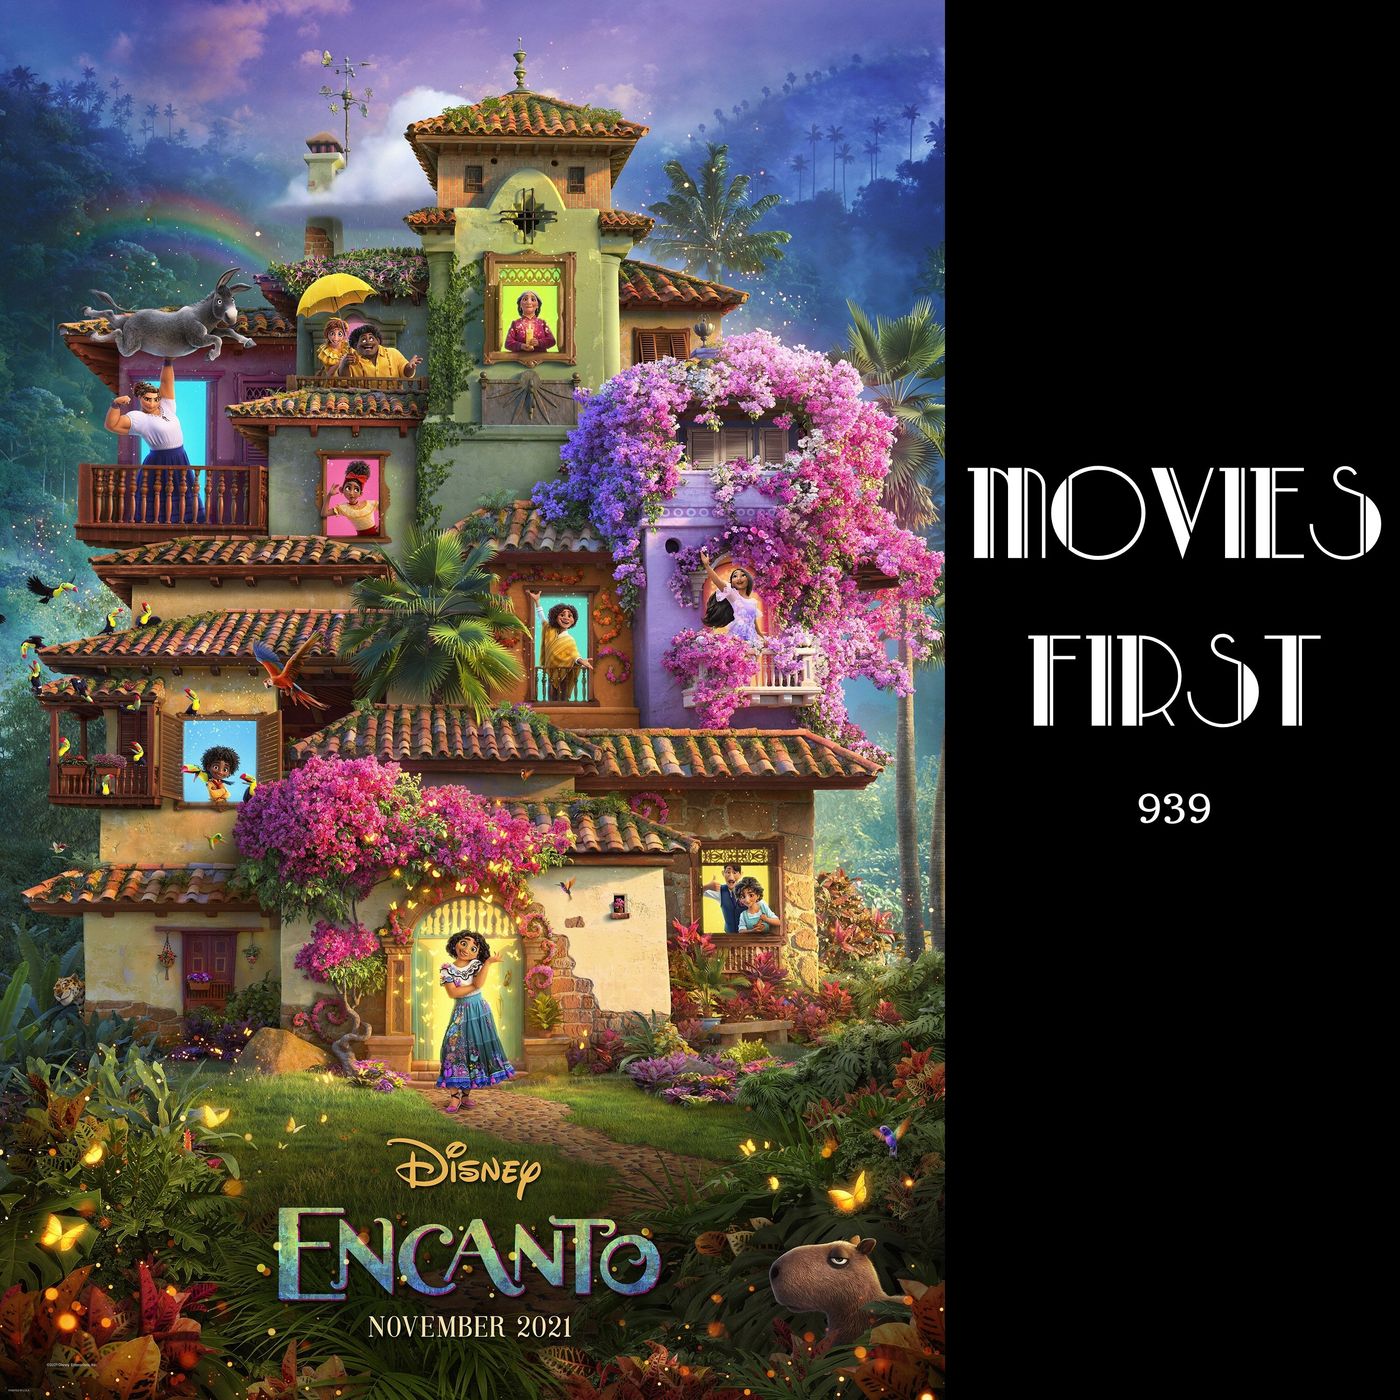 Encanto (Animation, Adventure, Comedy) (the @MoviesFirst review)